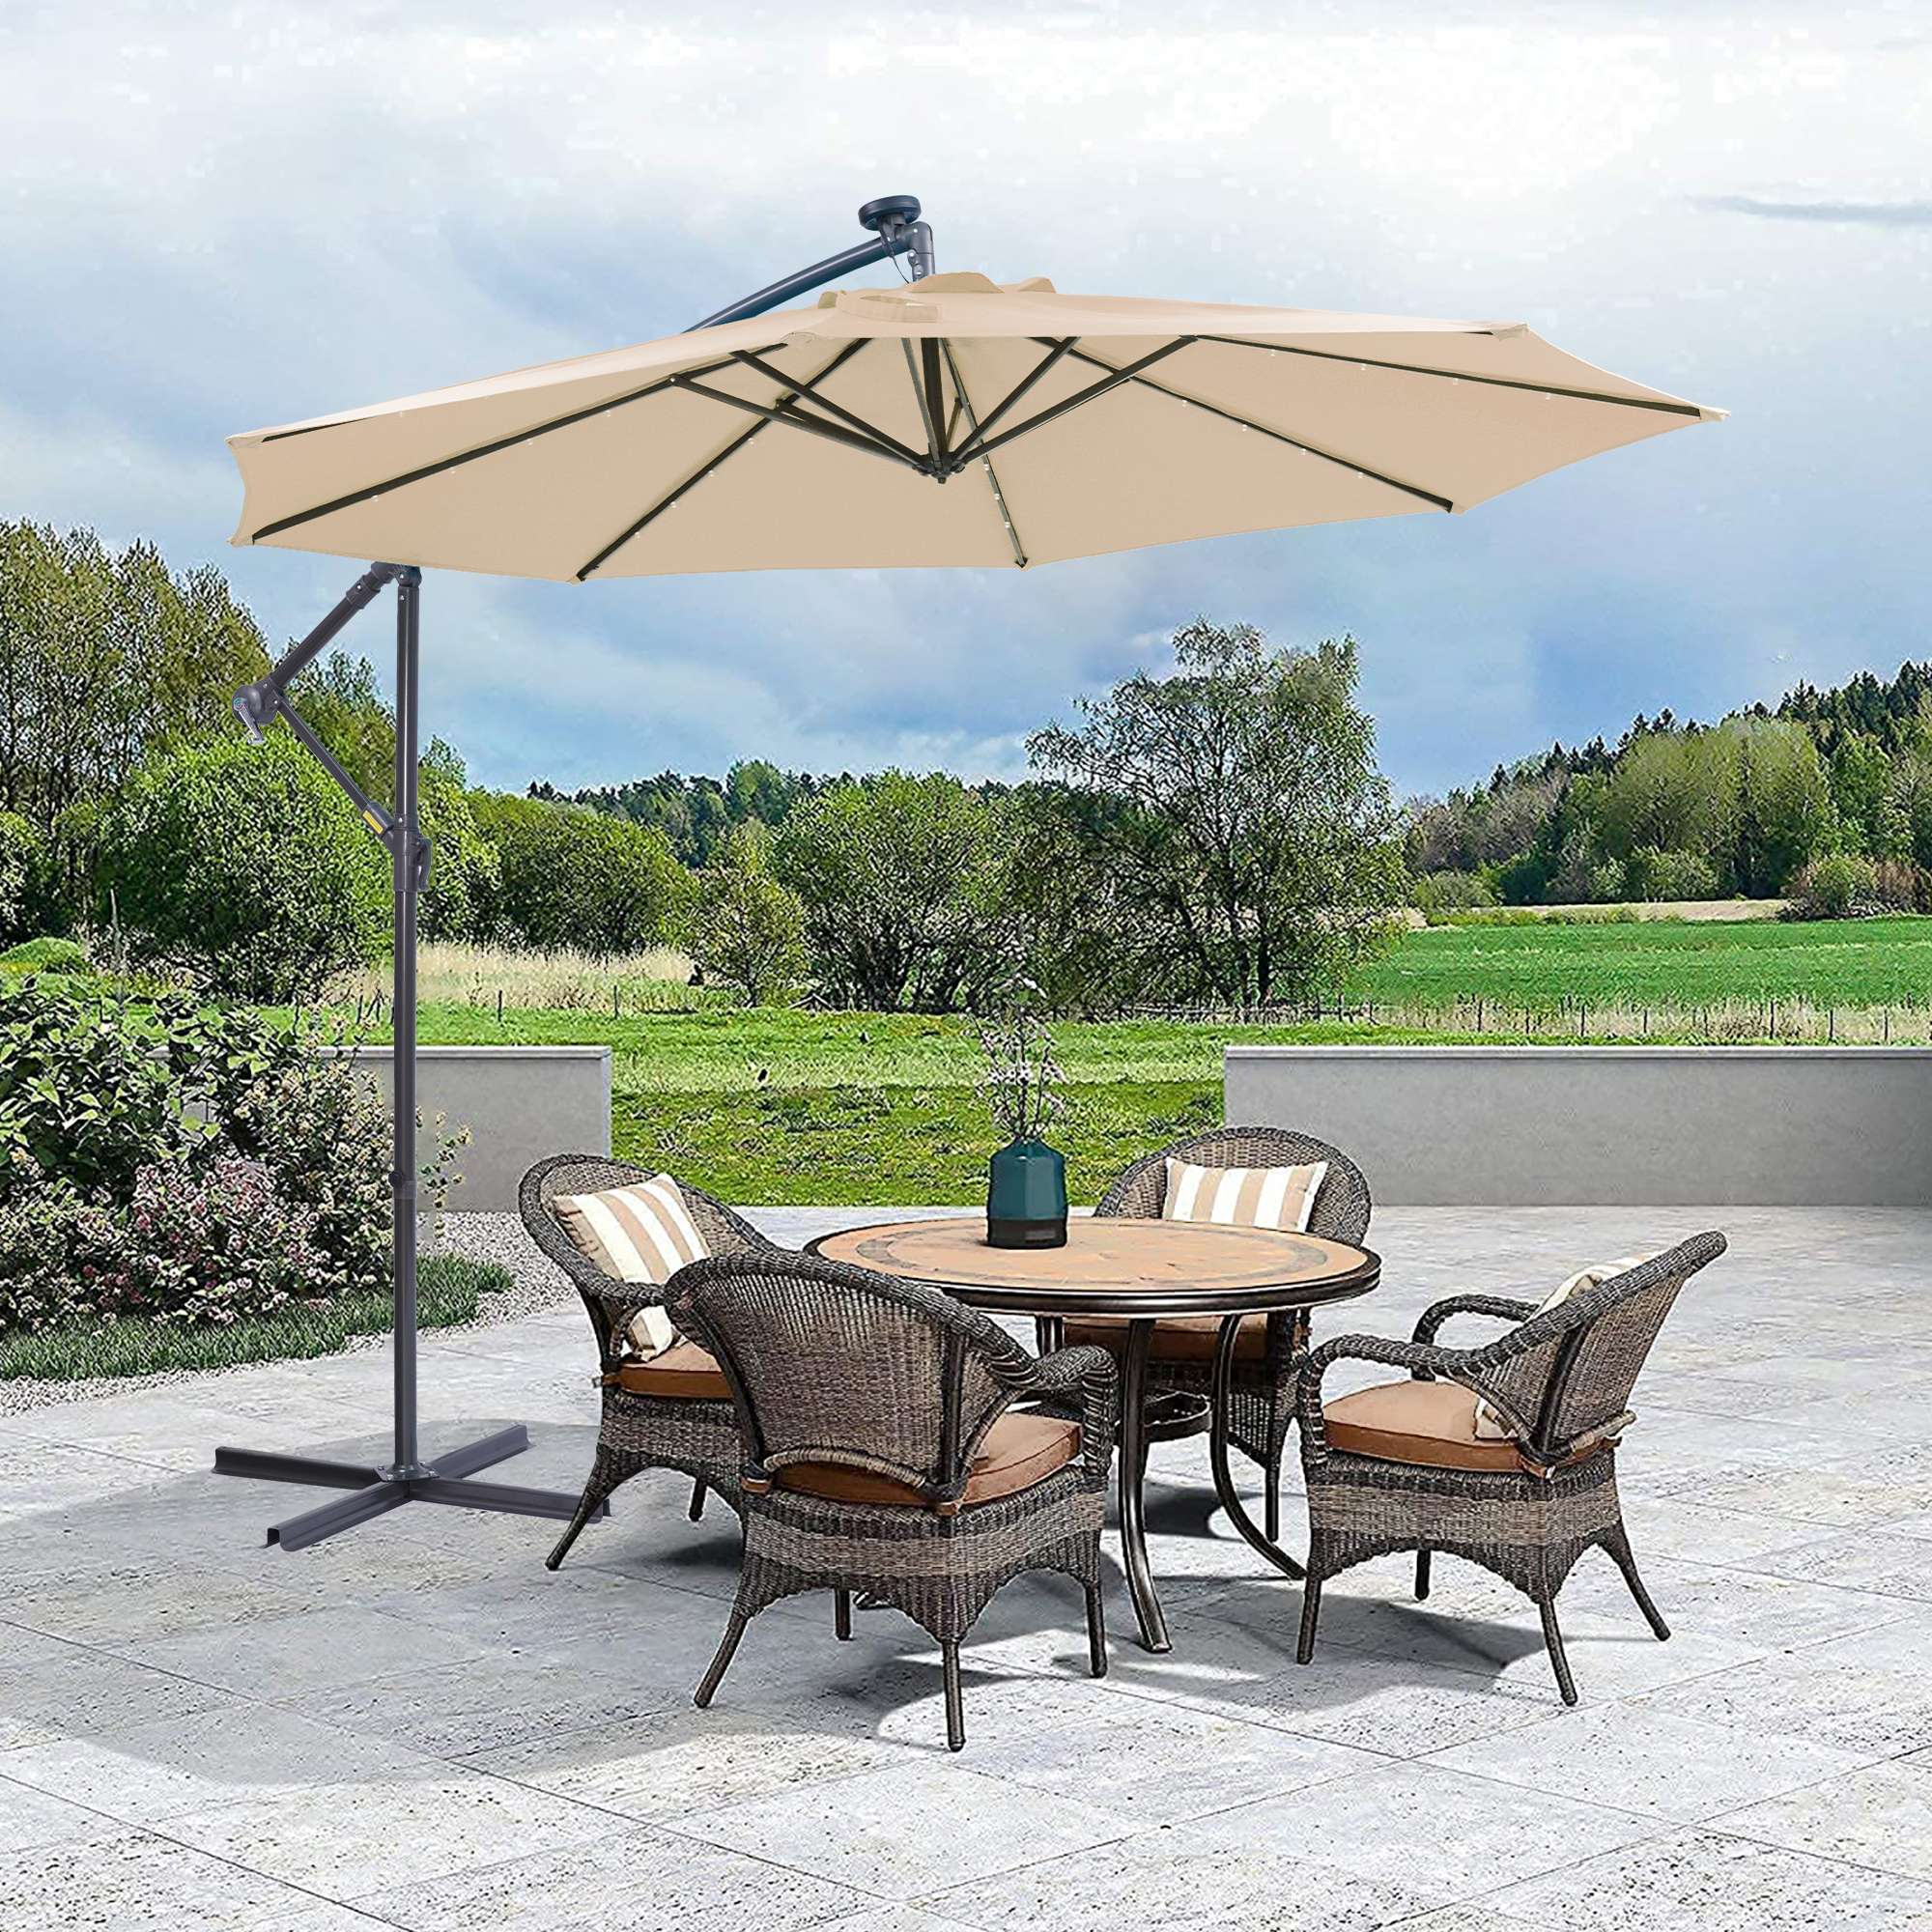 [KGORGE Plus]10 FT Solar Powered No-tilt Cantilever Patio Umbrella Commercial and Residential with 32 LED Lights